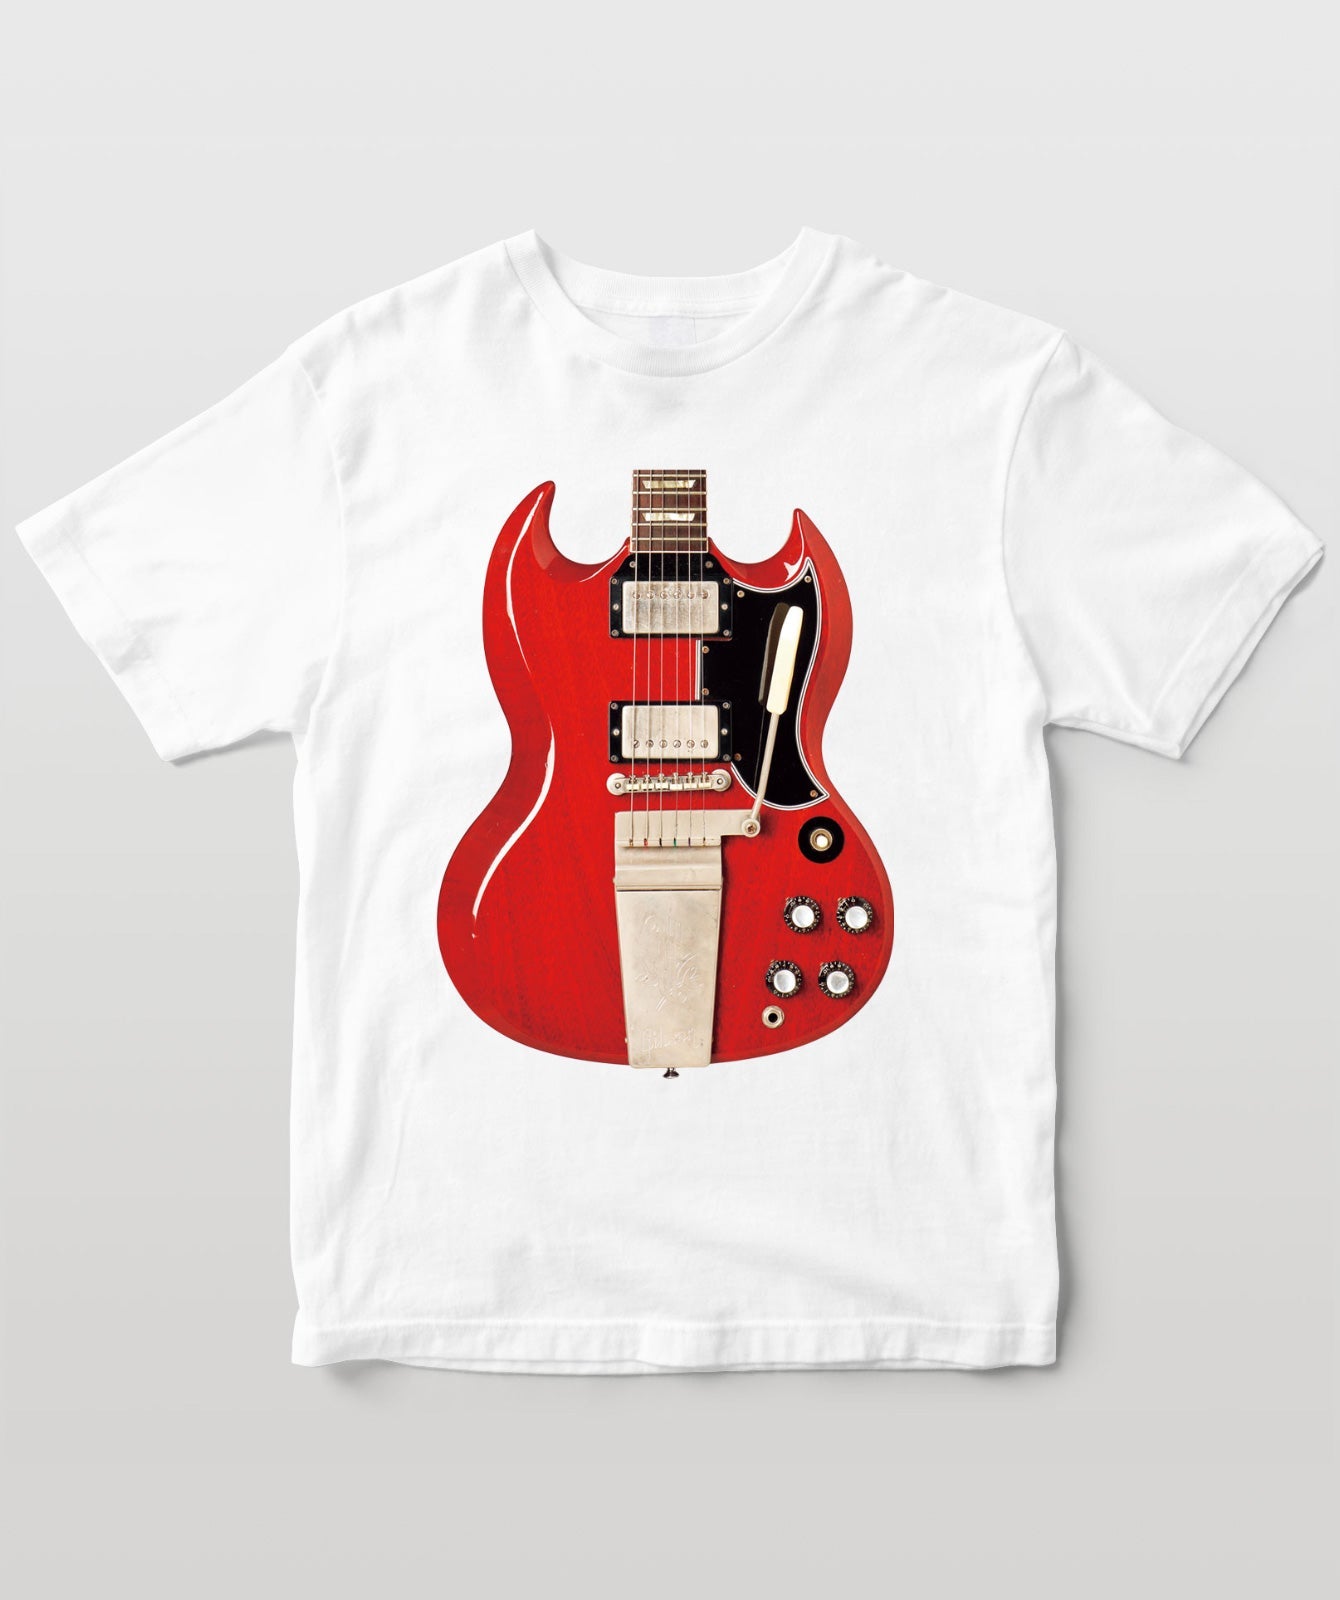 Gibson SG Player’s Book Tシャツ 1964 Standard